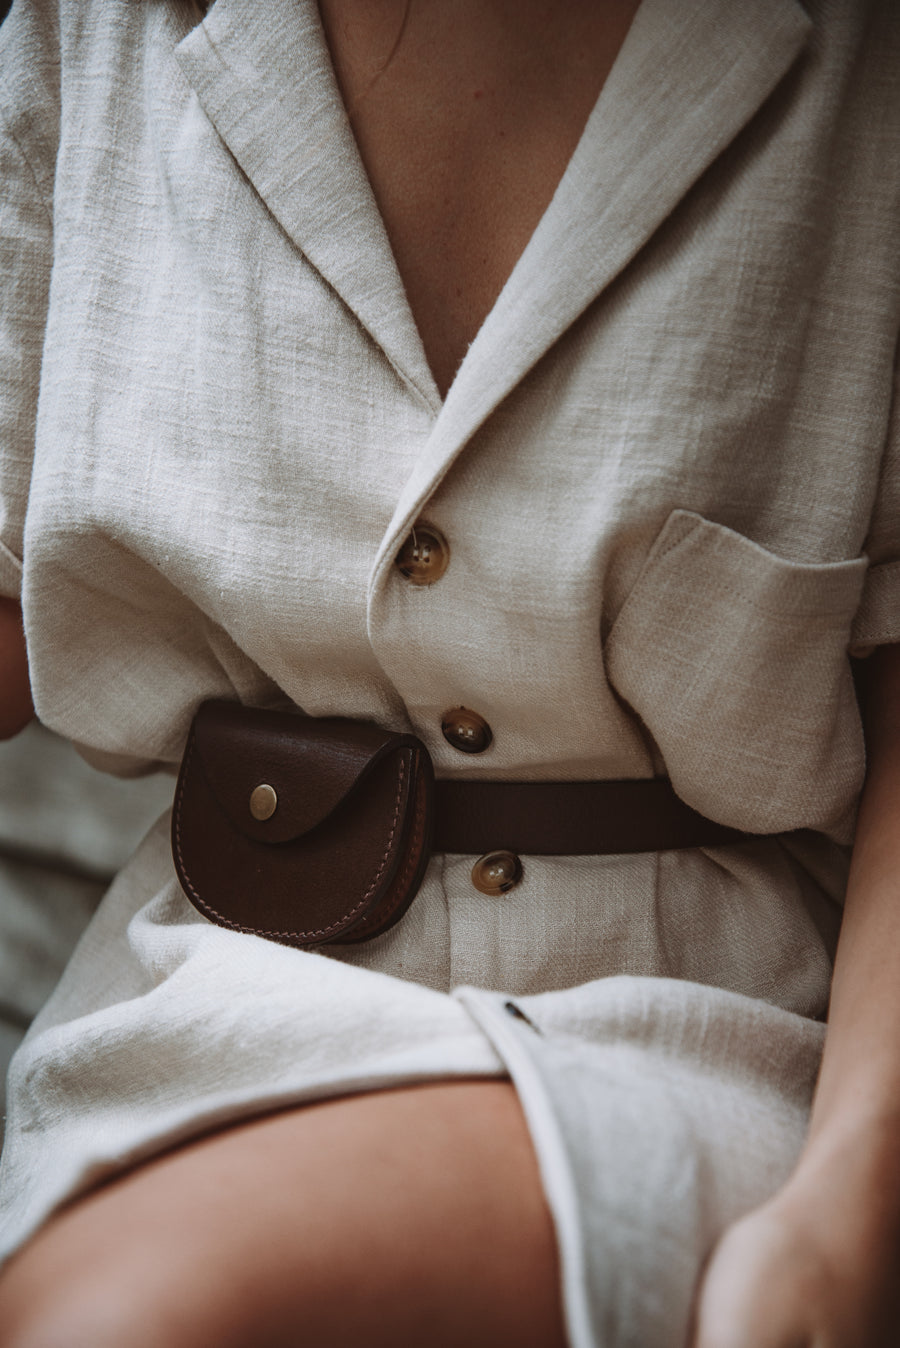 Chestnut Pouch Handcrafted Leather Belt